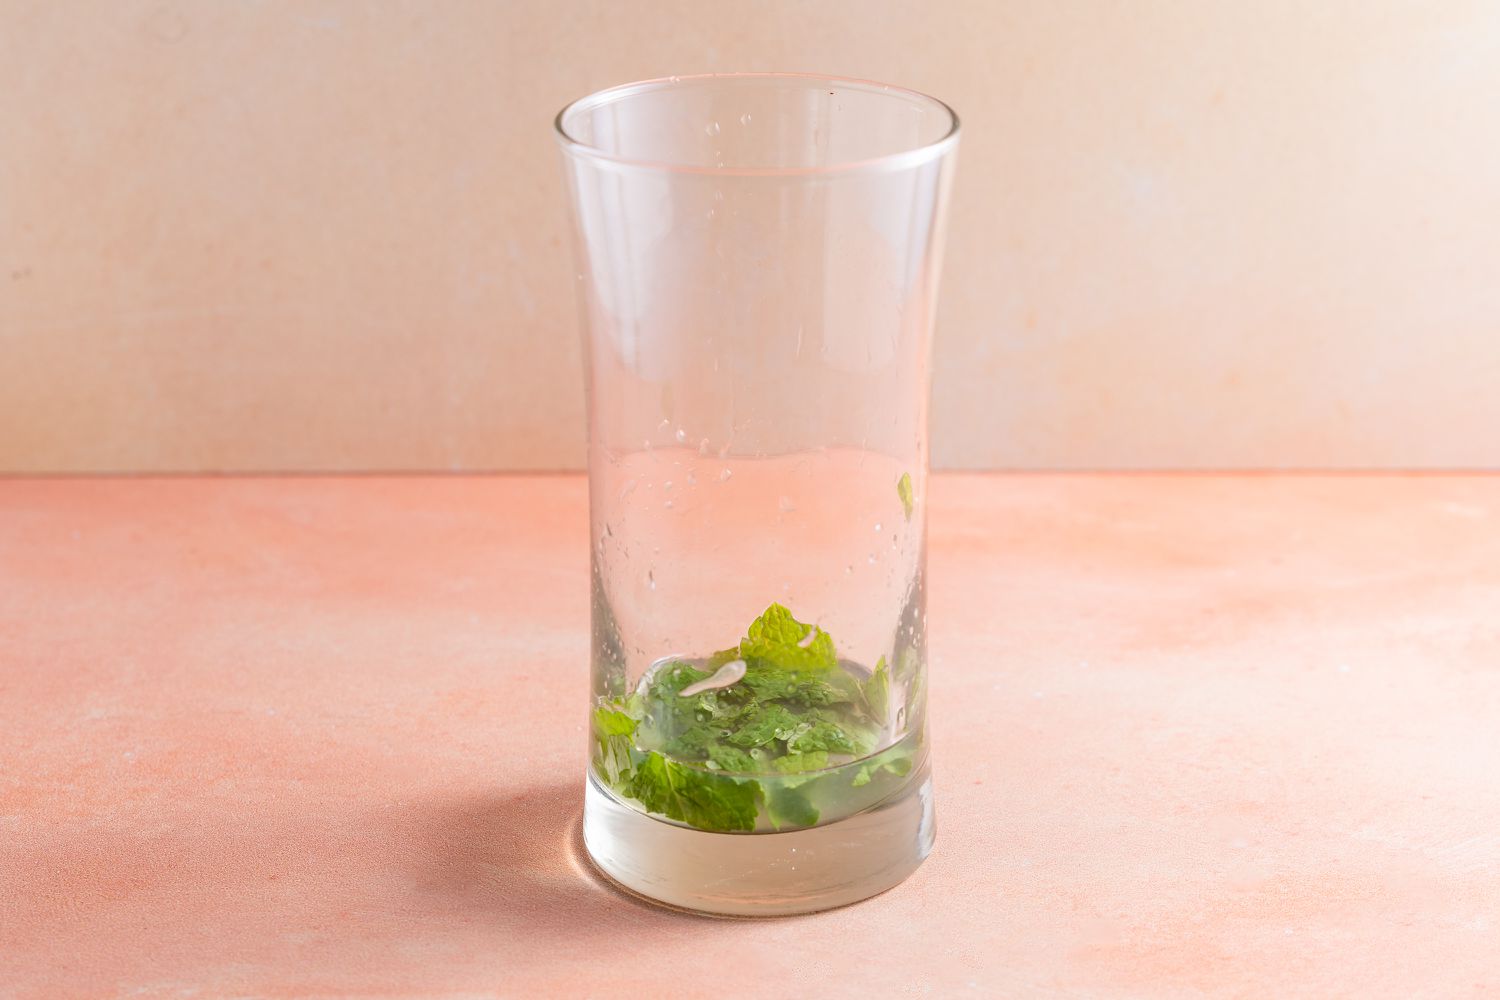 Muddled mint leaves, lime, and syrup in a glass